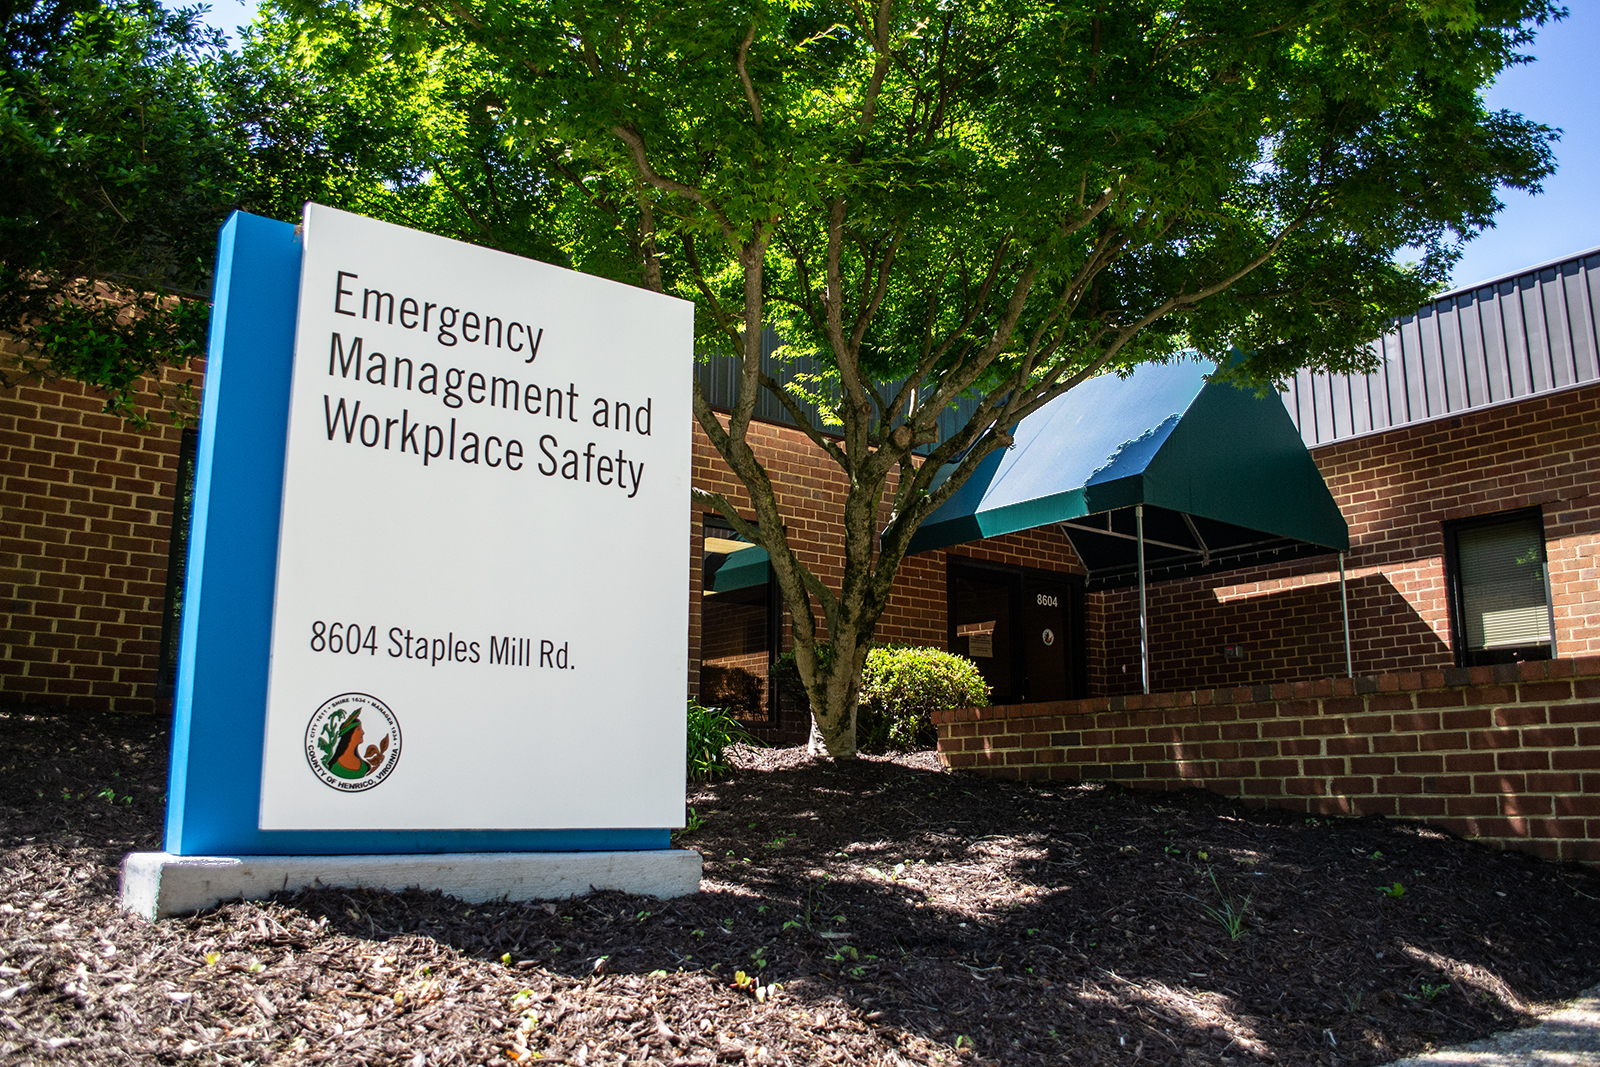 Emergency Management and Workplace Safety photo